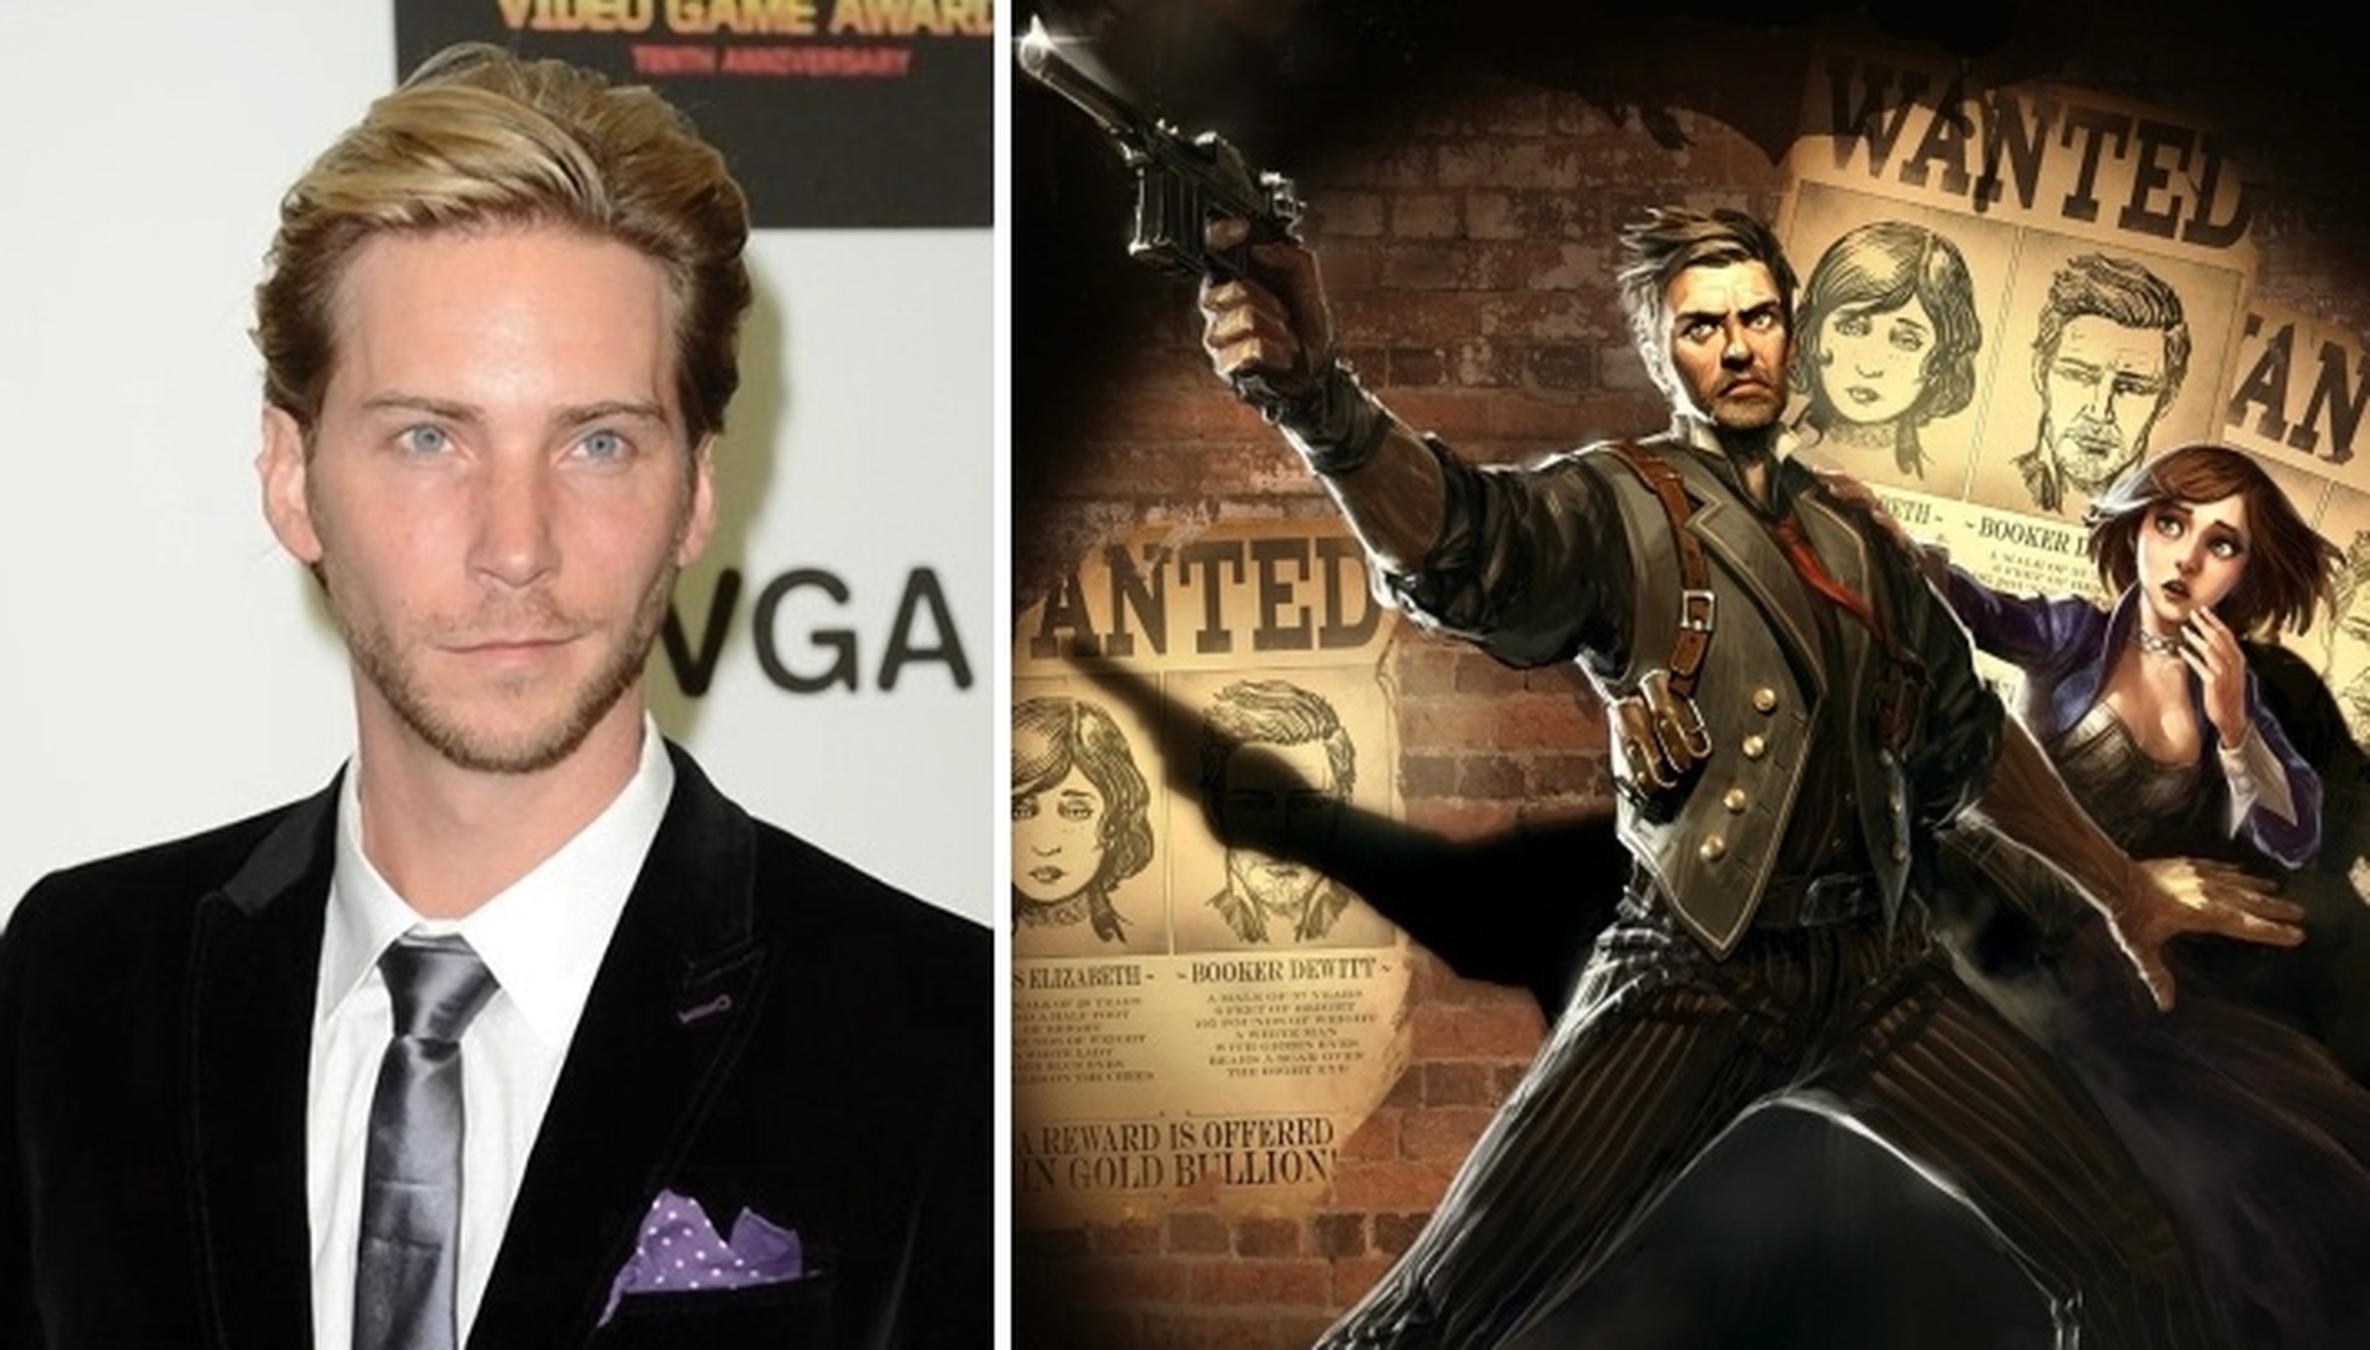 Troy Baker - Commercial Voice Over, American Actor and Musician